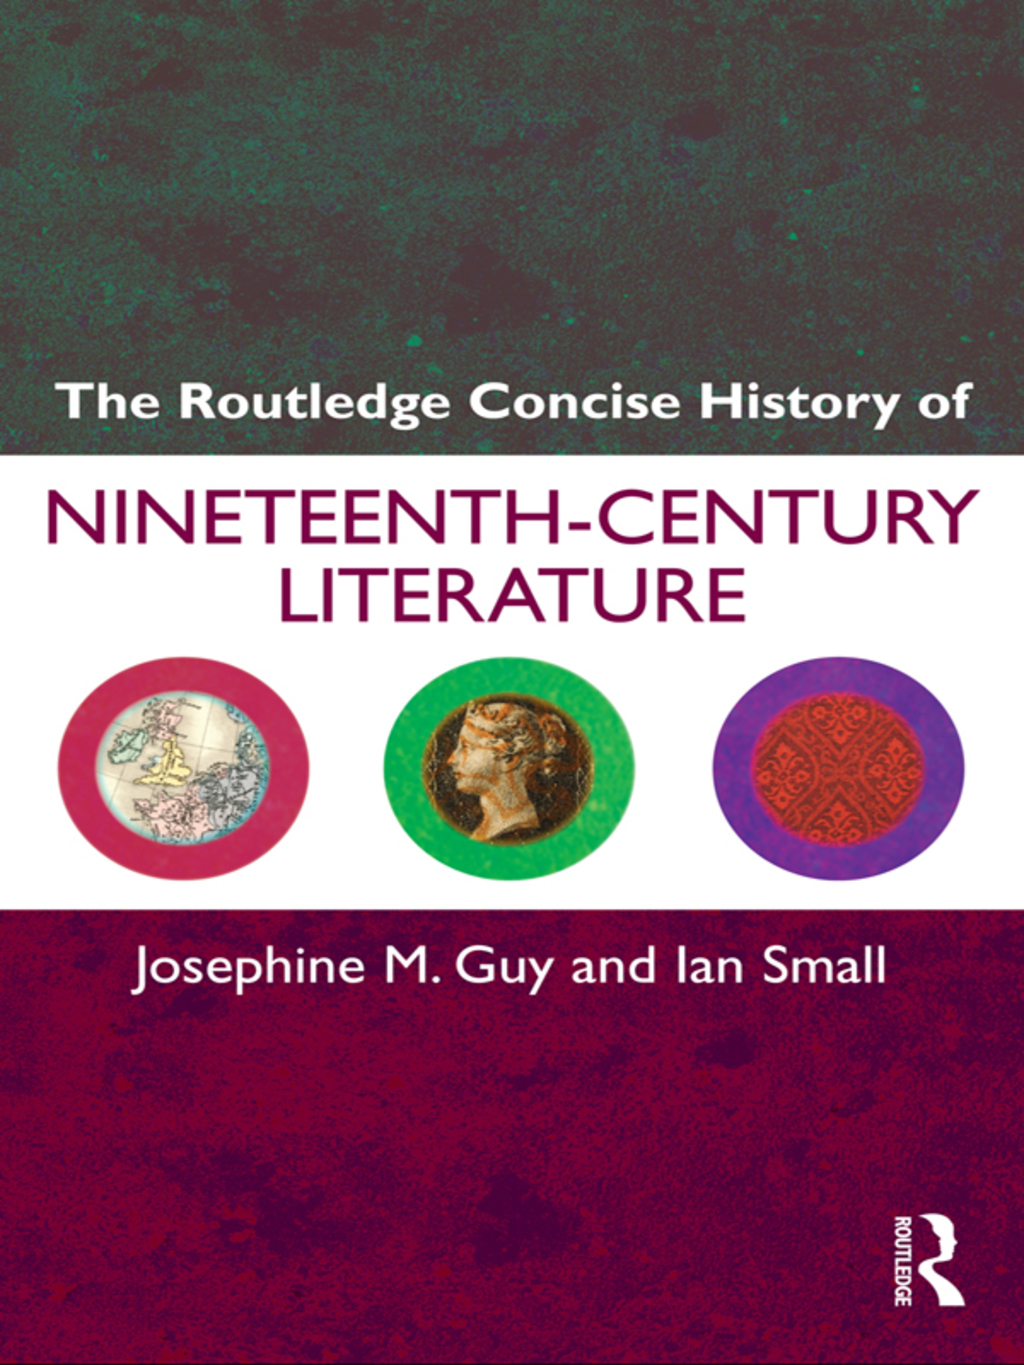 The Routledge Concise History of Nineteenth-Century Literature (eBook) - Josephine Guy; Ian Small